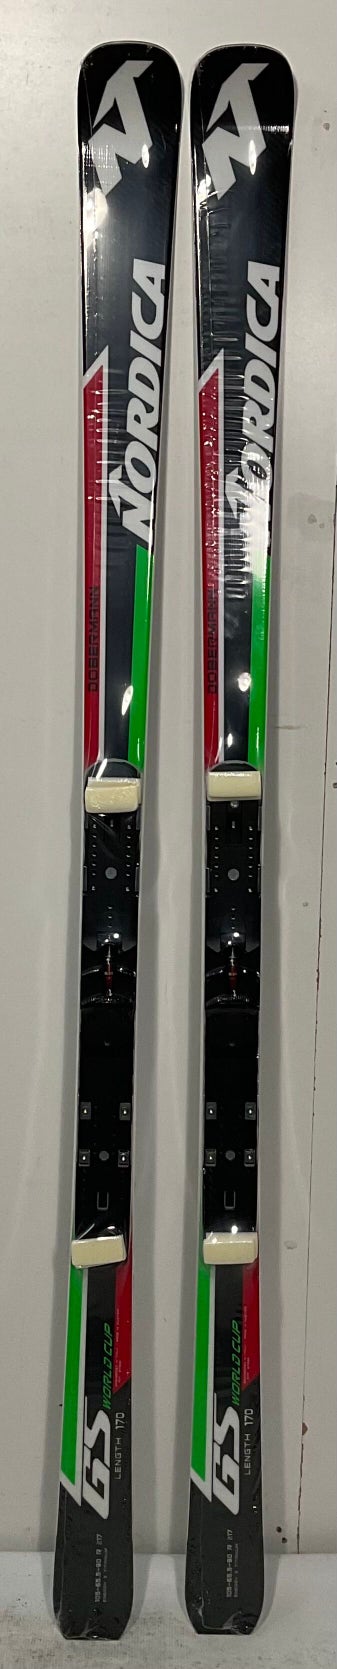 New Nordica 170cm Dobermann GS Race Plate Skis Without Bindings (SY1400)